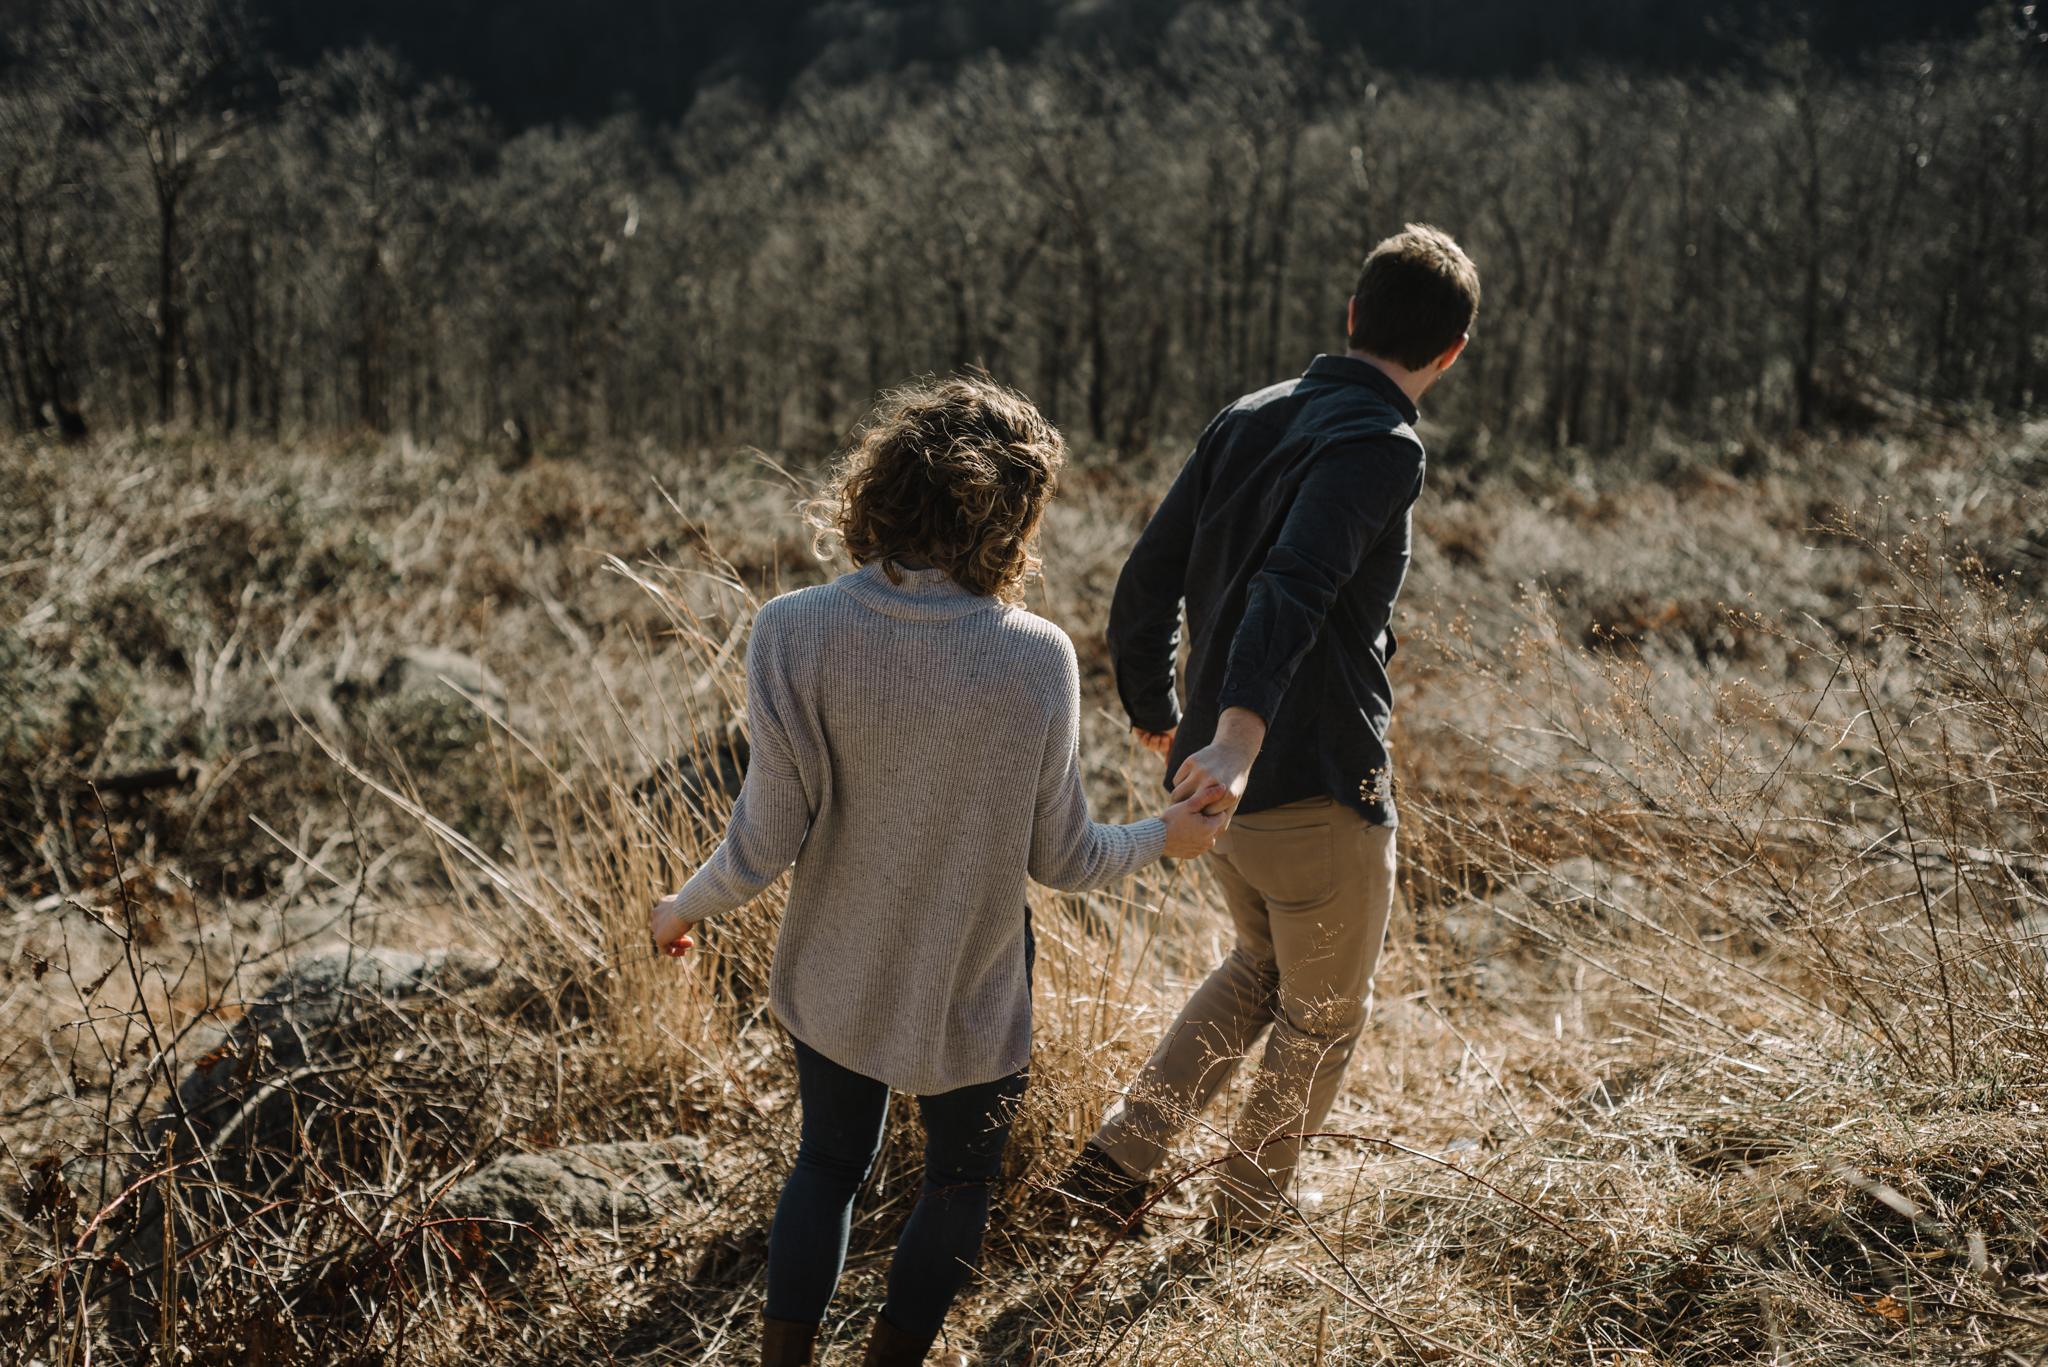 Alli and Mitchell - Shenandoah National Park Adventure Winter Engagement Session on Skyline Drive - White Sails Creative Elopement Photography_18.JPG